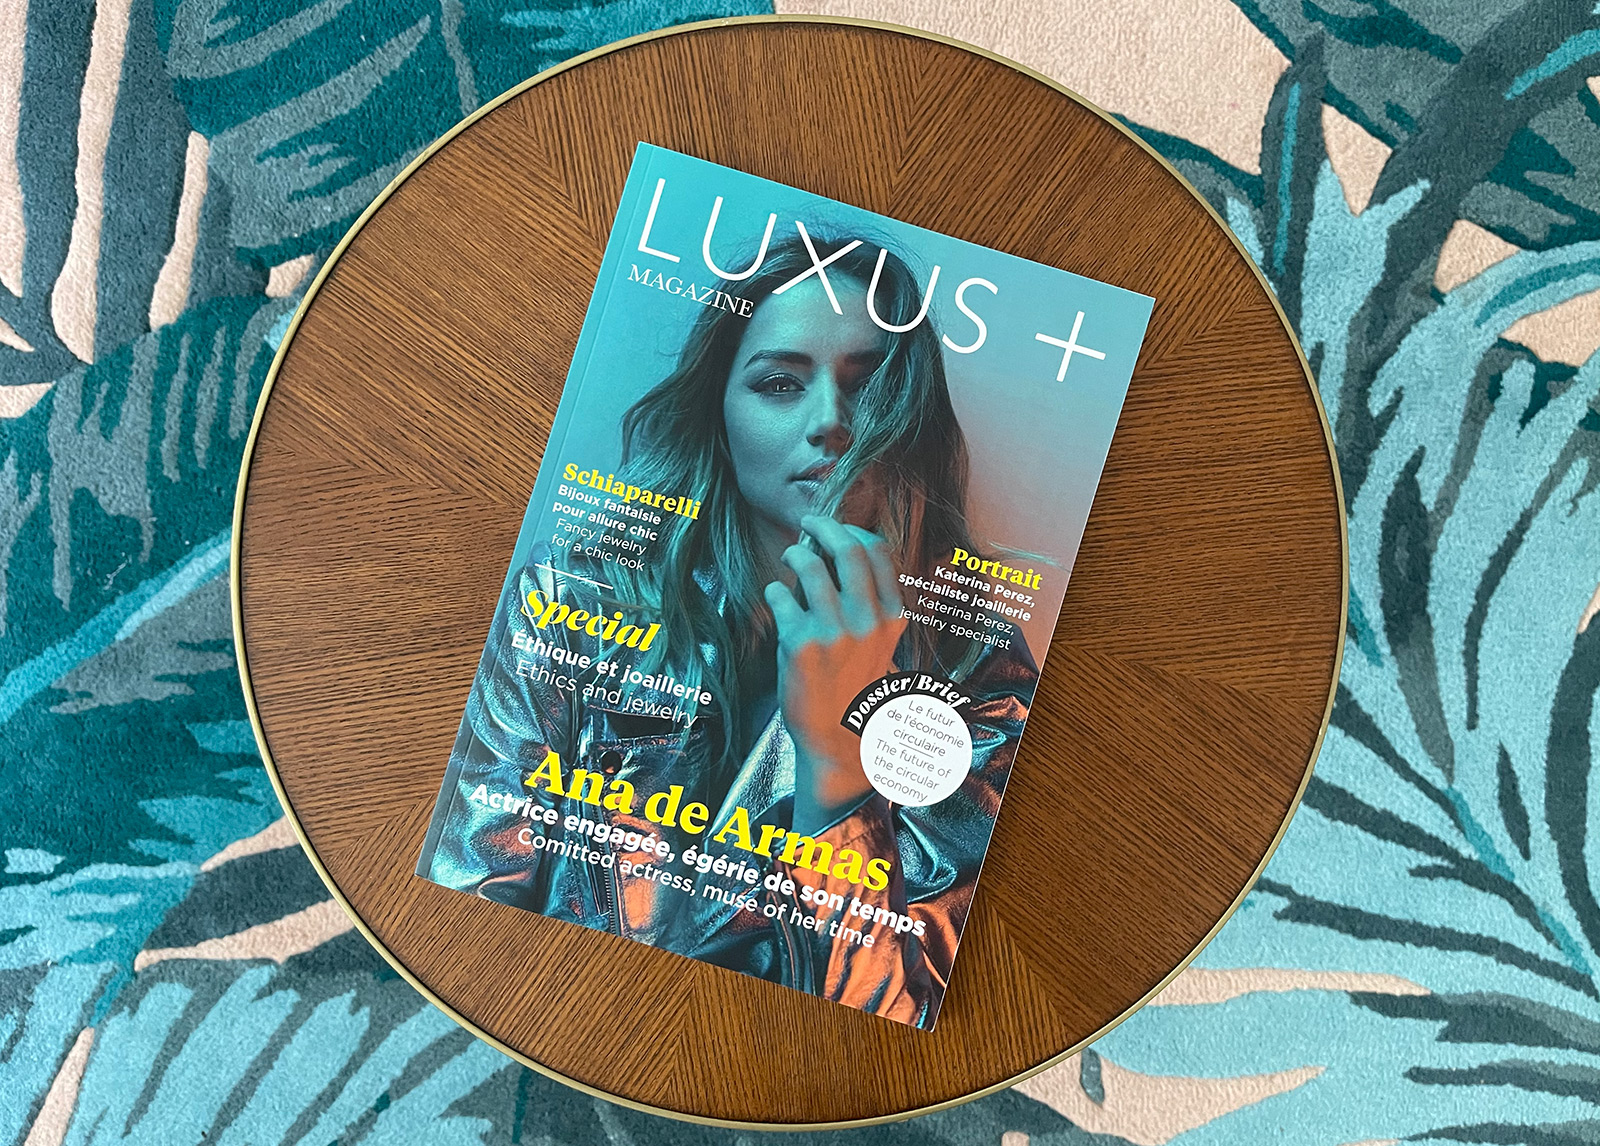 LUXUS + Magazine with my name mentioned on the cover